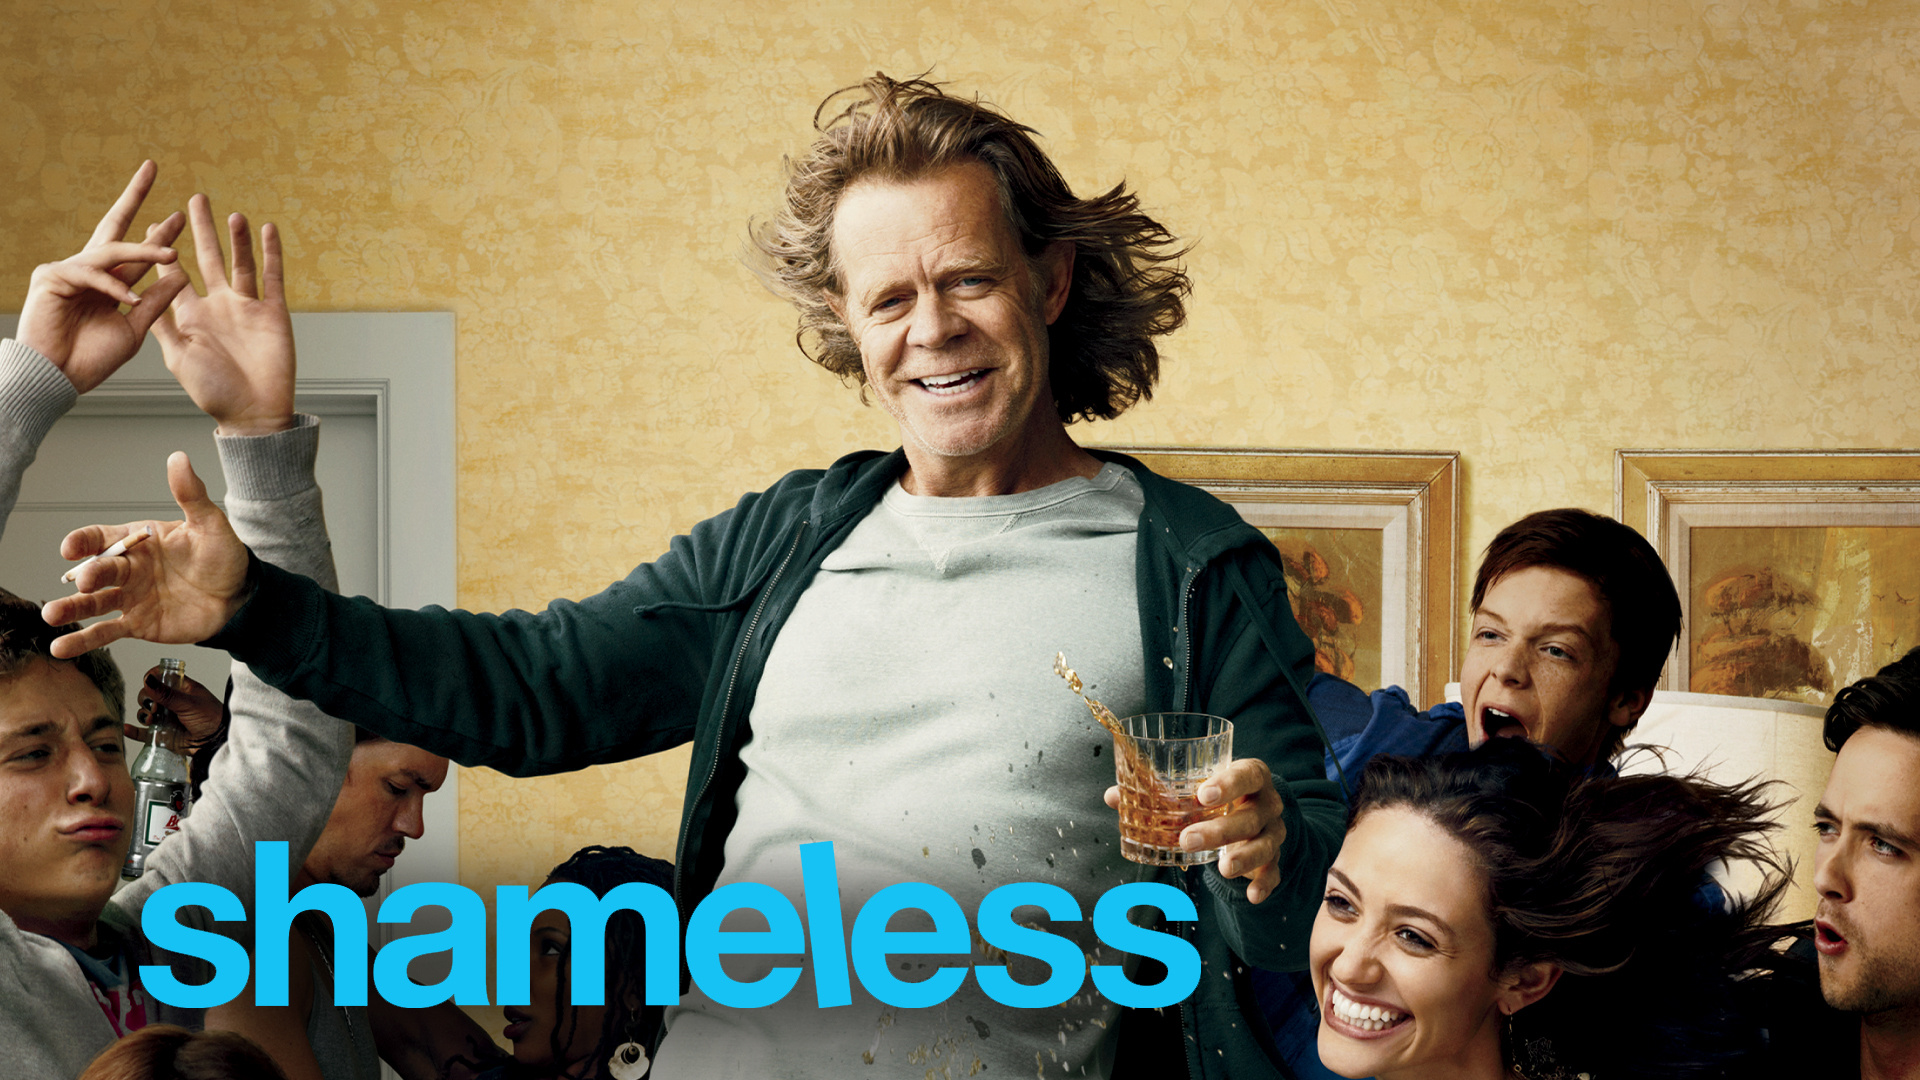 Gritty drama, Shameless characters, Watch or stream series, Addiction and poverty, 1920x1080 Full HD Desktop